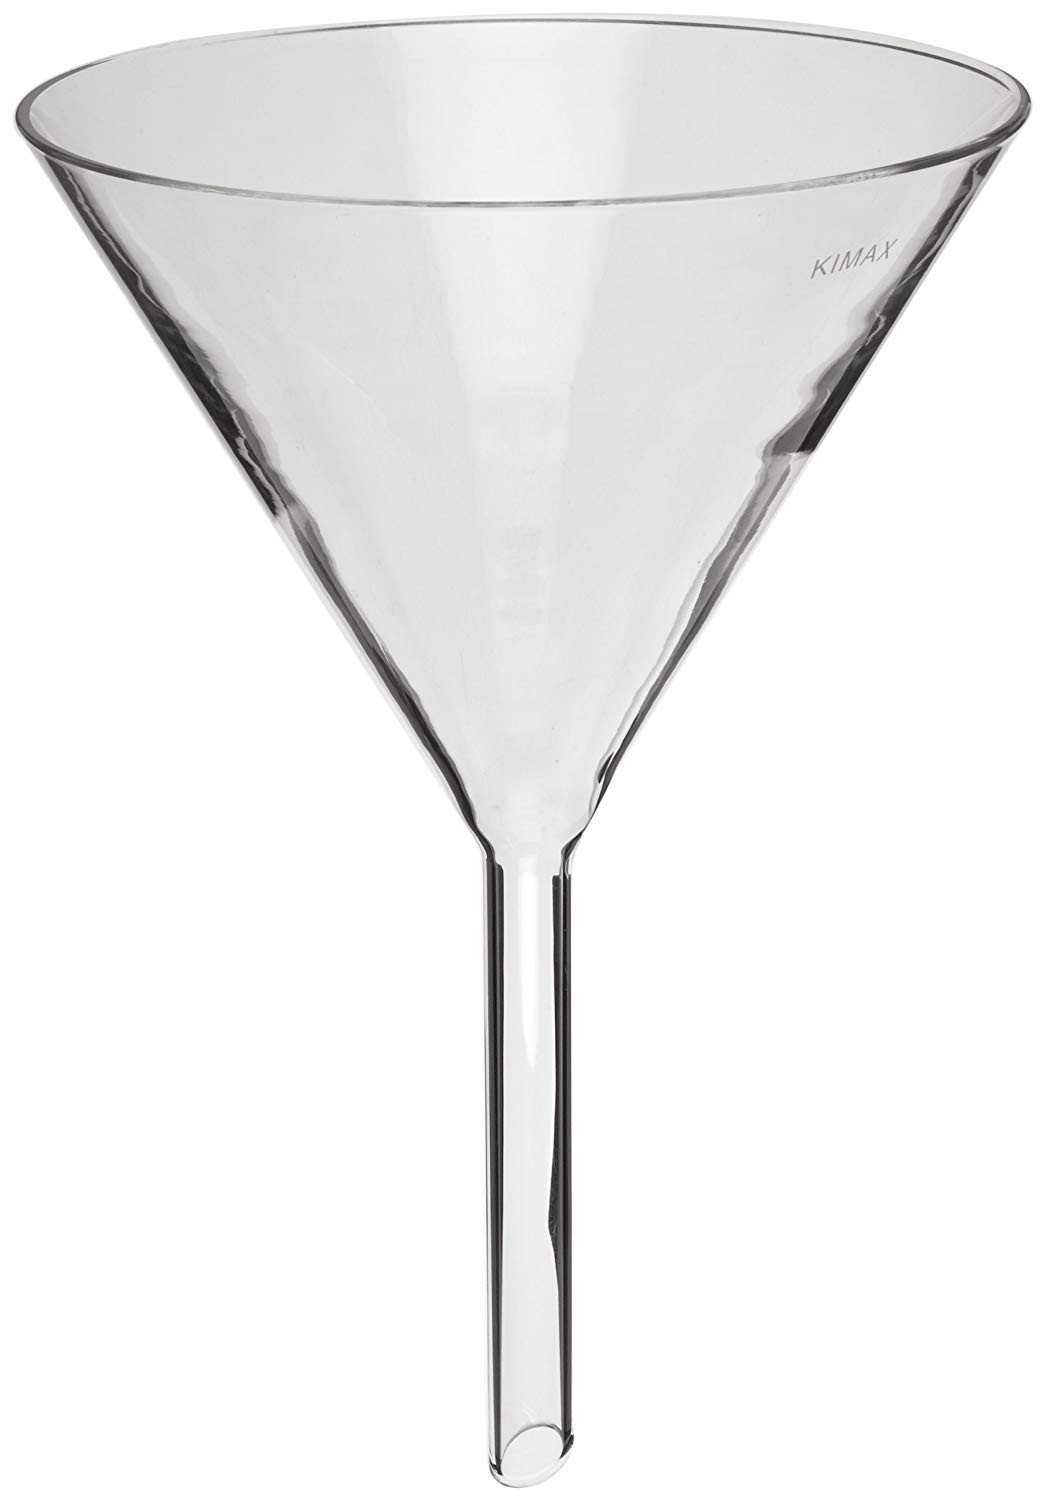 19 Elegant Giant Margarita Glass Vase 2024 free download giant margarita glass vase of kimble 28980 200 glass round filling funnel with long stem 200mm throughout kimble 28980 200 glass round filling funnel with long stem 200mm id science lab fill